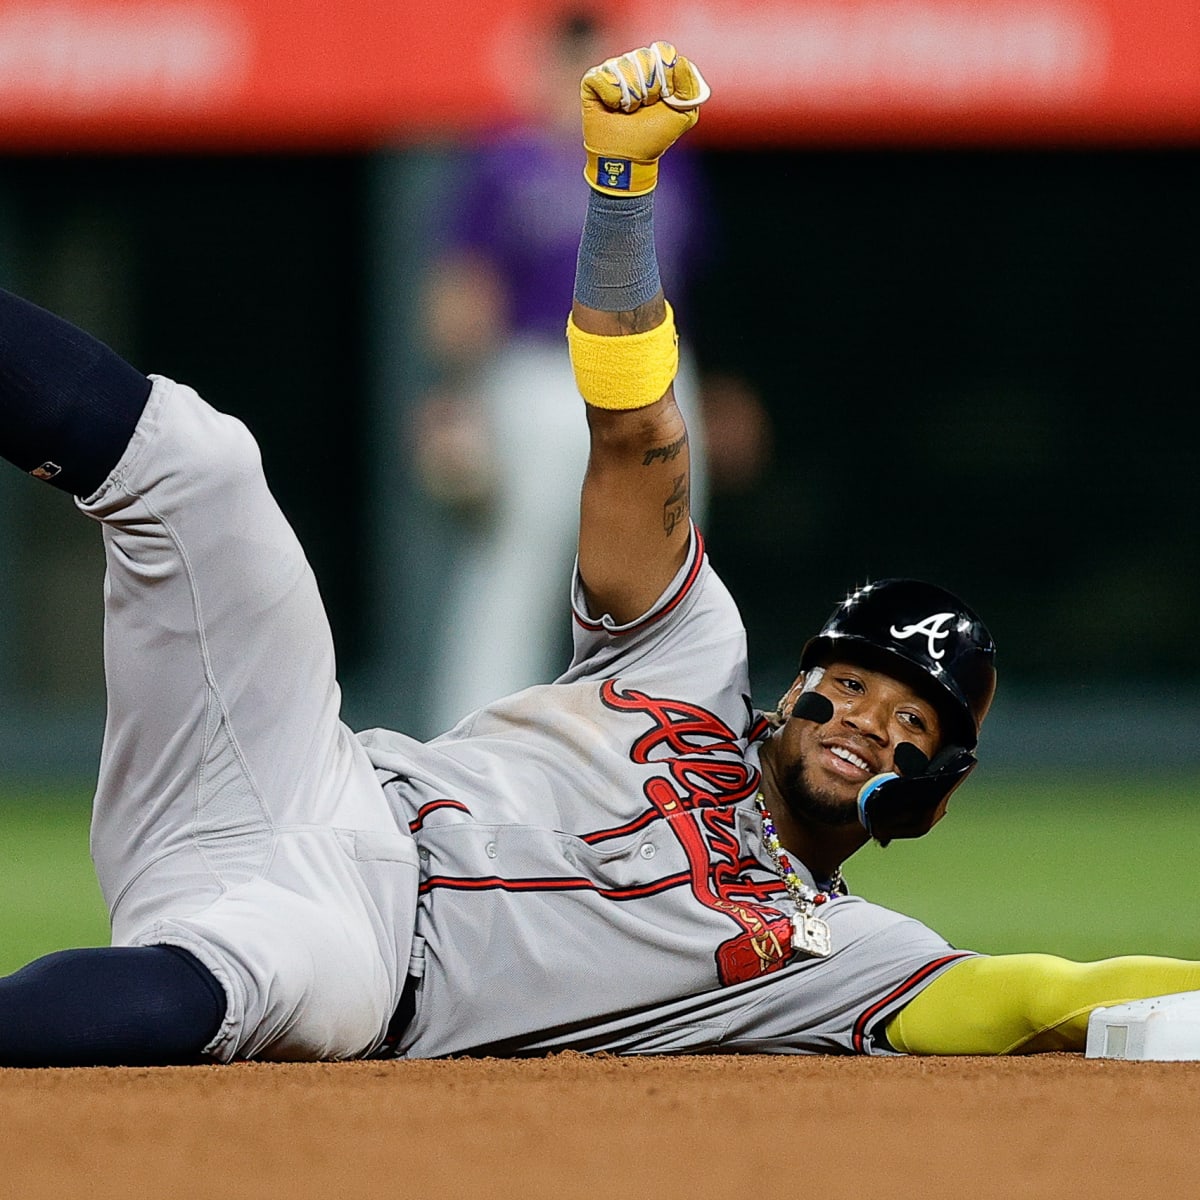 Atlanta Braves' Ronald Acuña Jr. Adds to Historic Season With Home Run,  Stolen Bases - Fastball